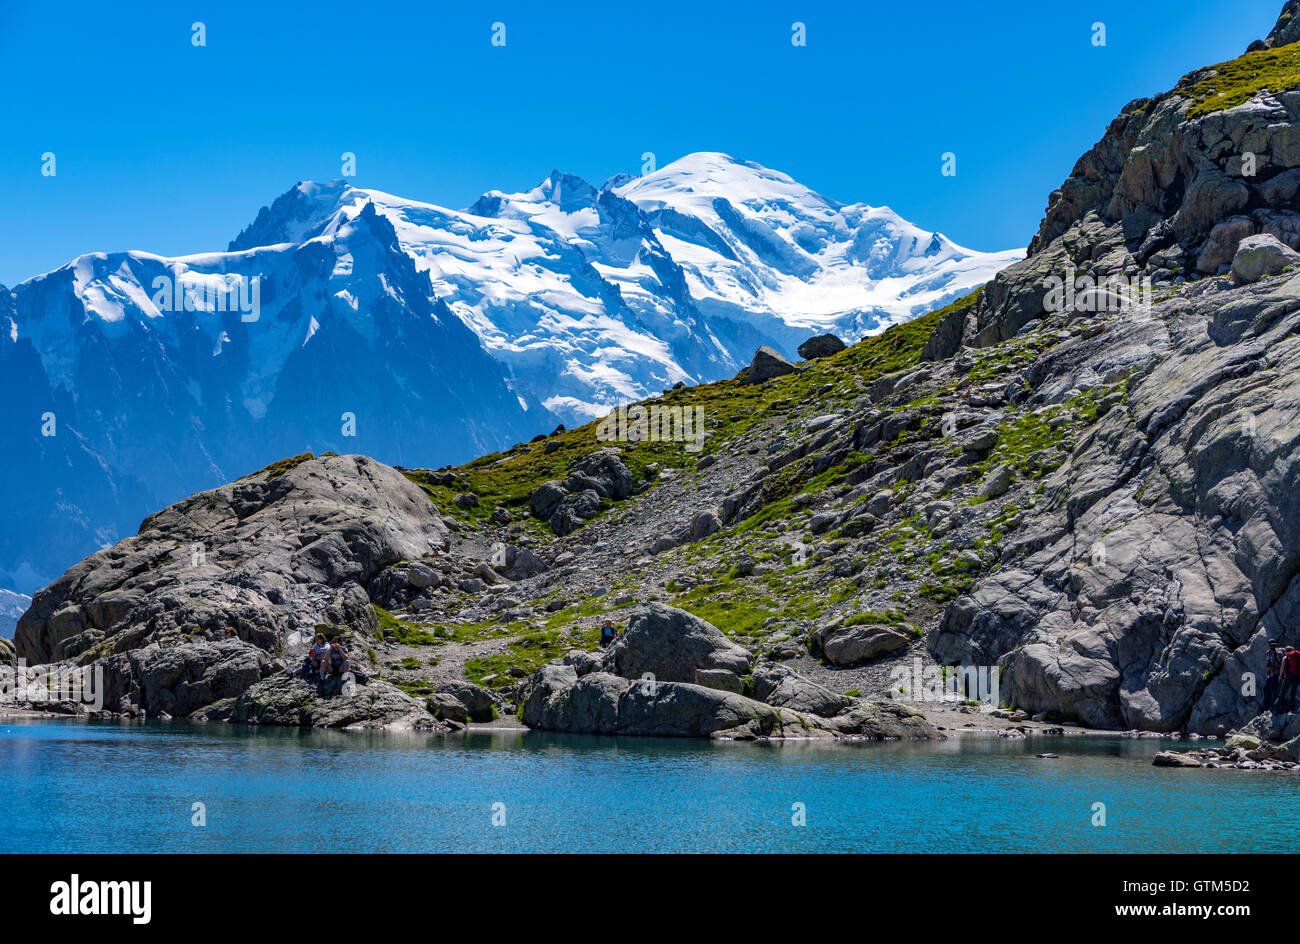 Lac Blanc one of the most popular walks from Chamonix in the French Alps. On Tour de Mont Blanc walk. Stock Photo